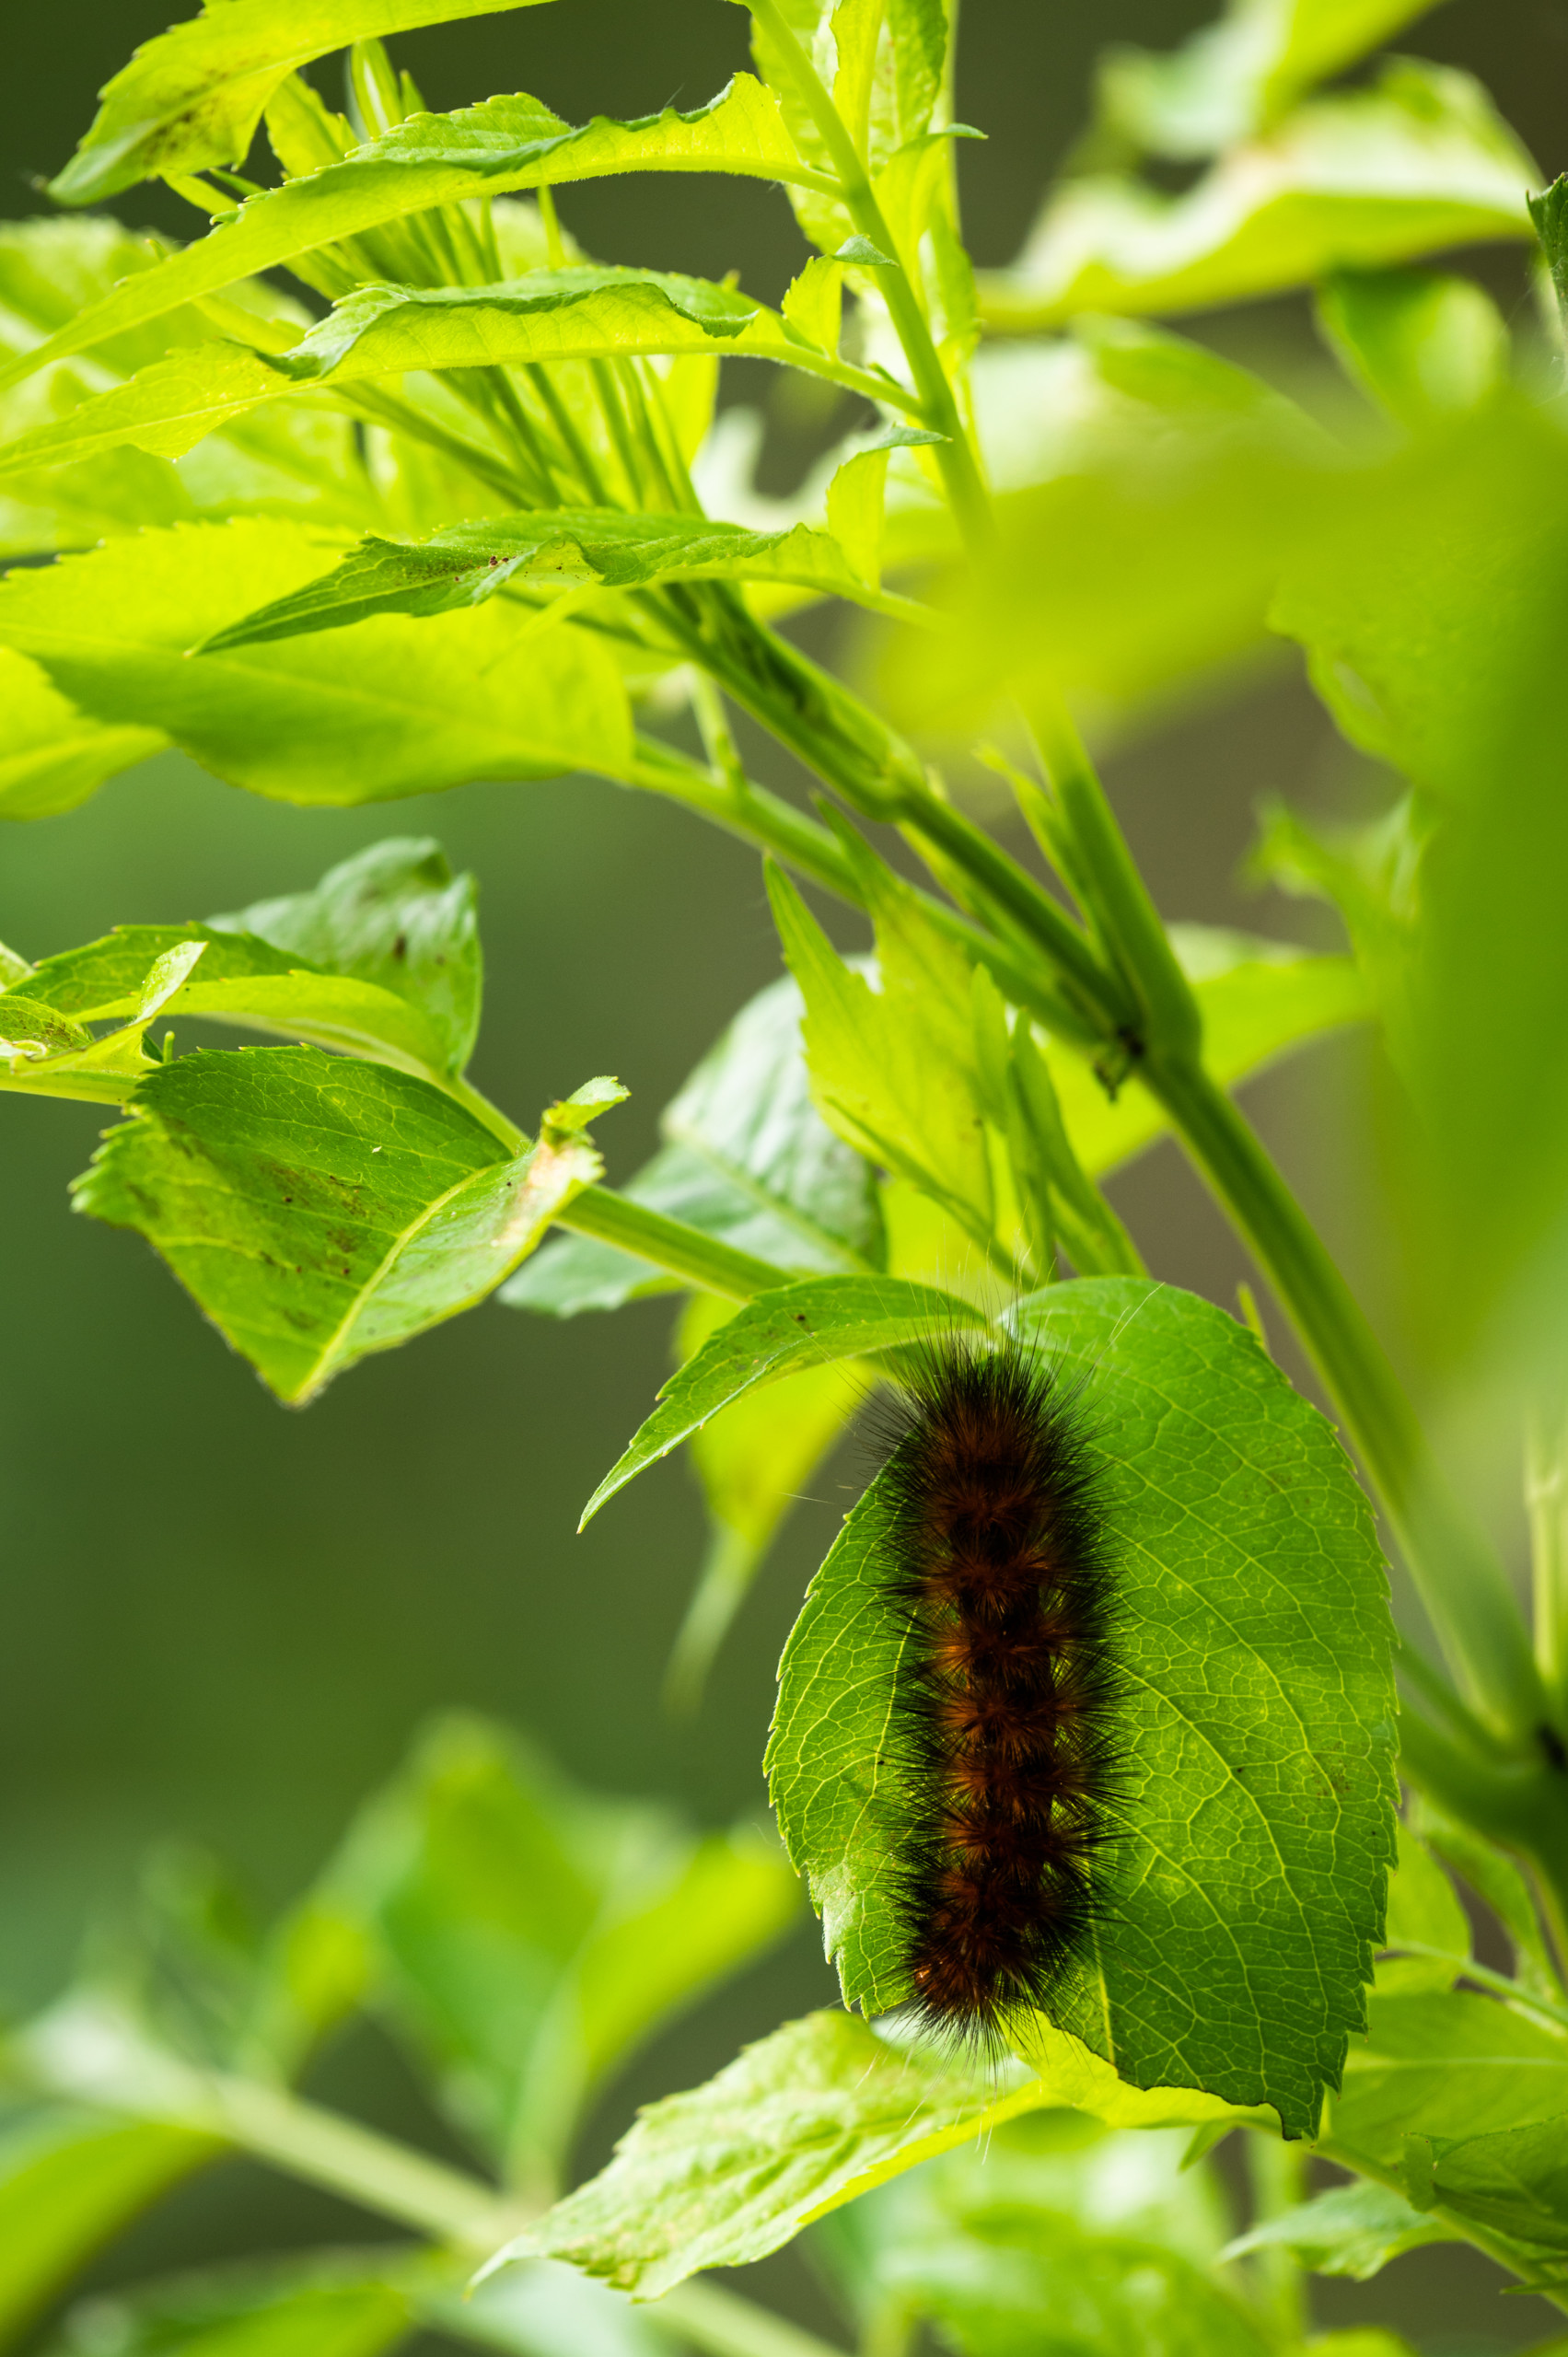 A caterpillar feeds on leaves